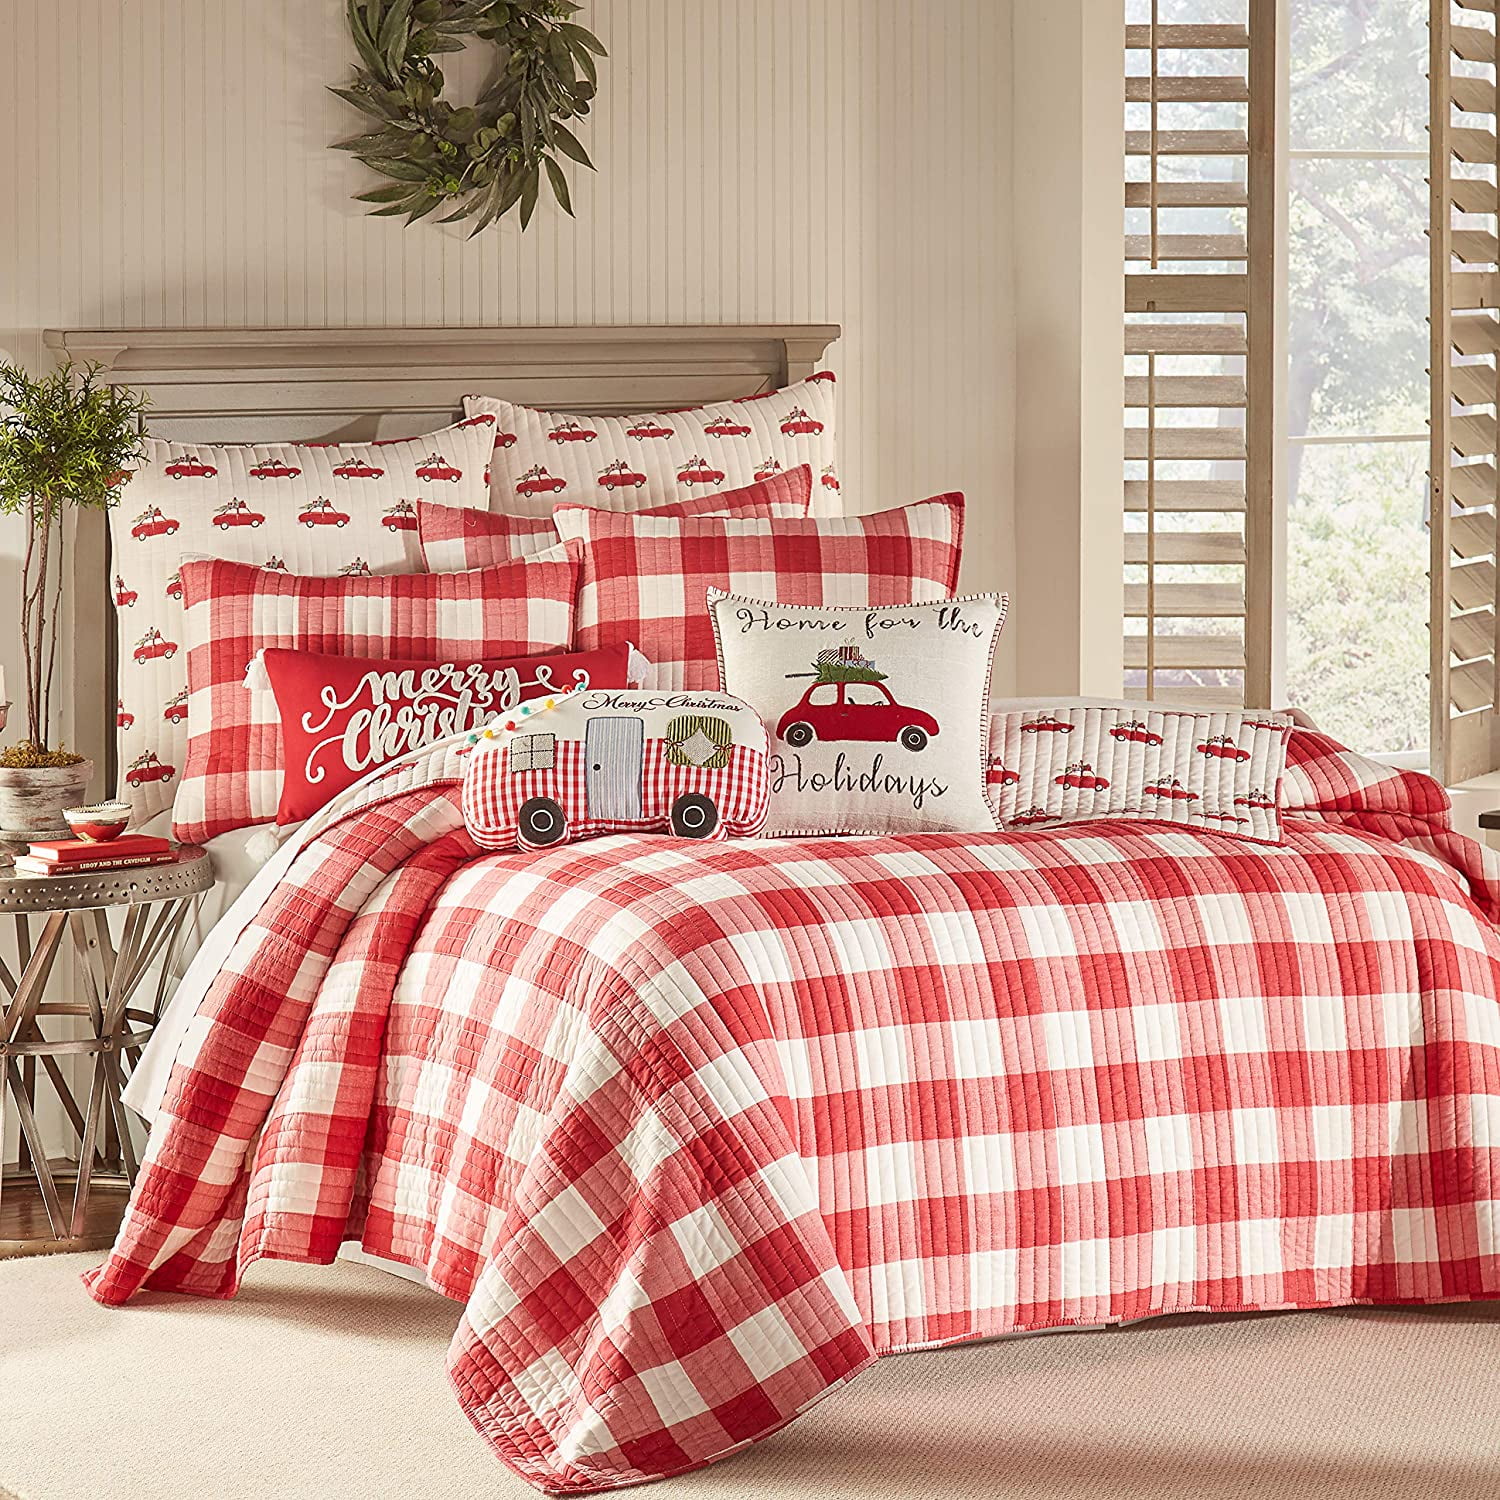 Levtex Home Road Trip Quilt Set Twin, Buffalo Check Twin Bedding